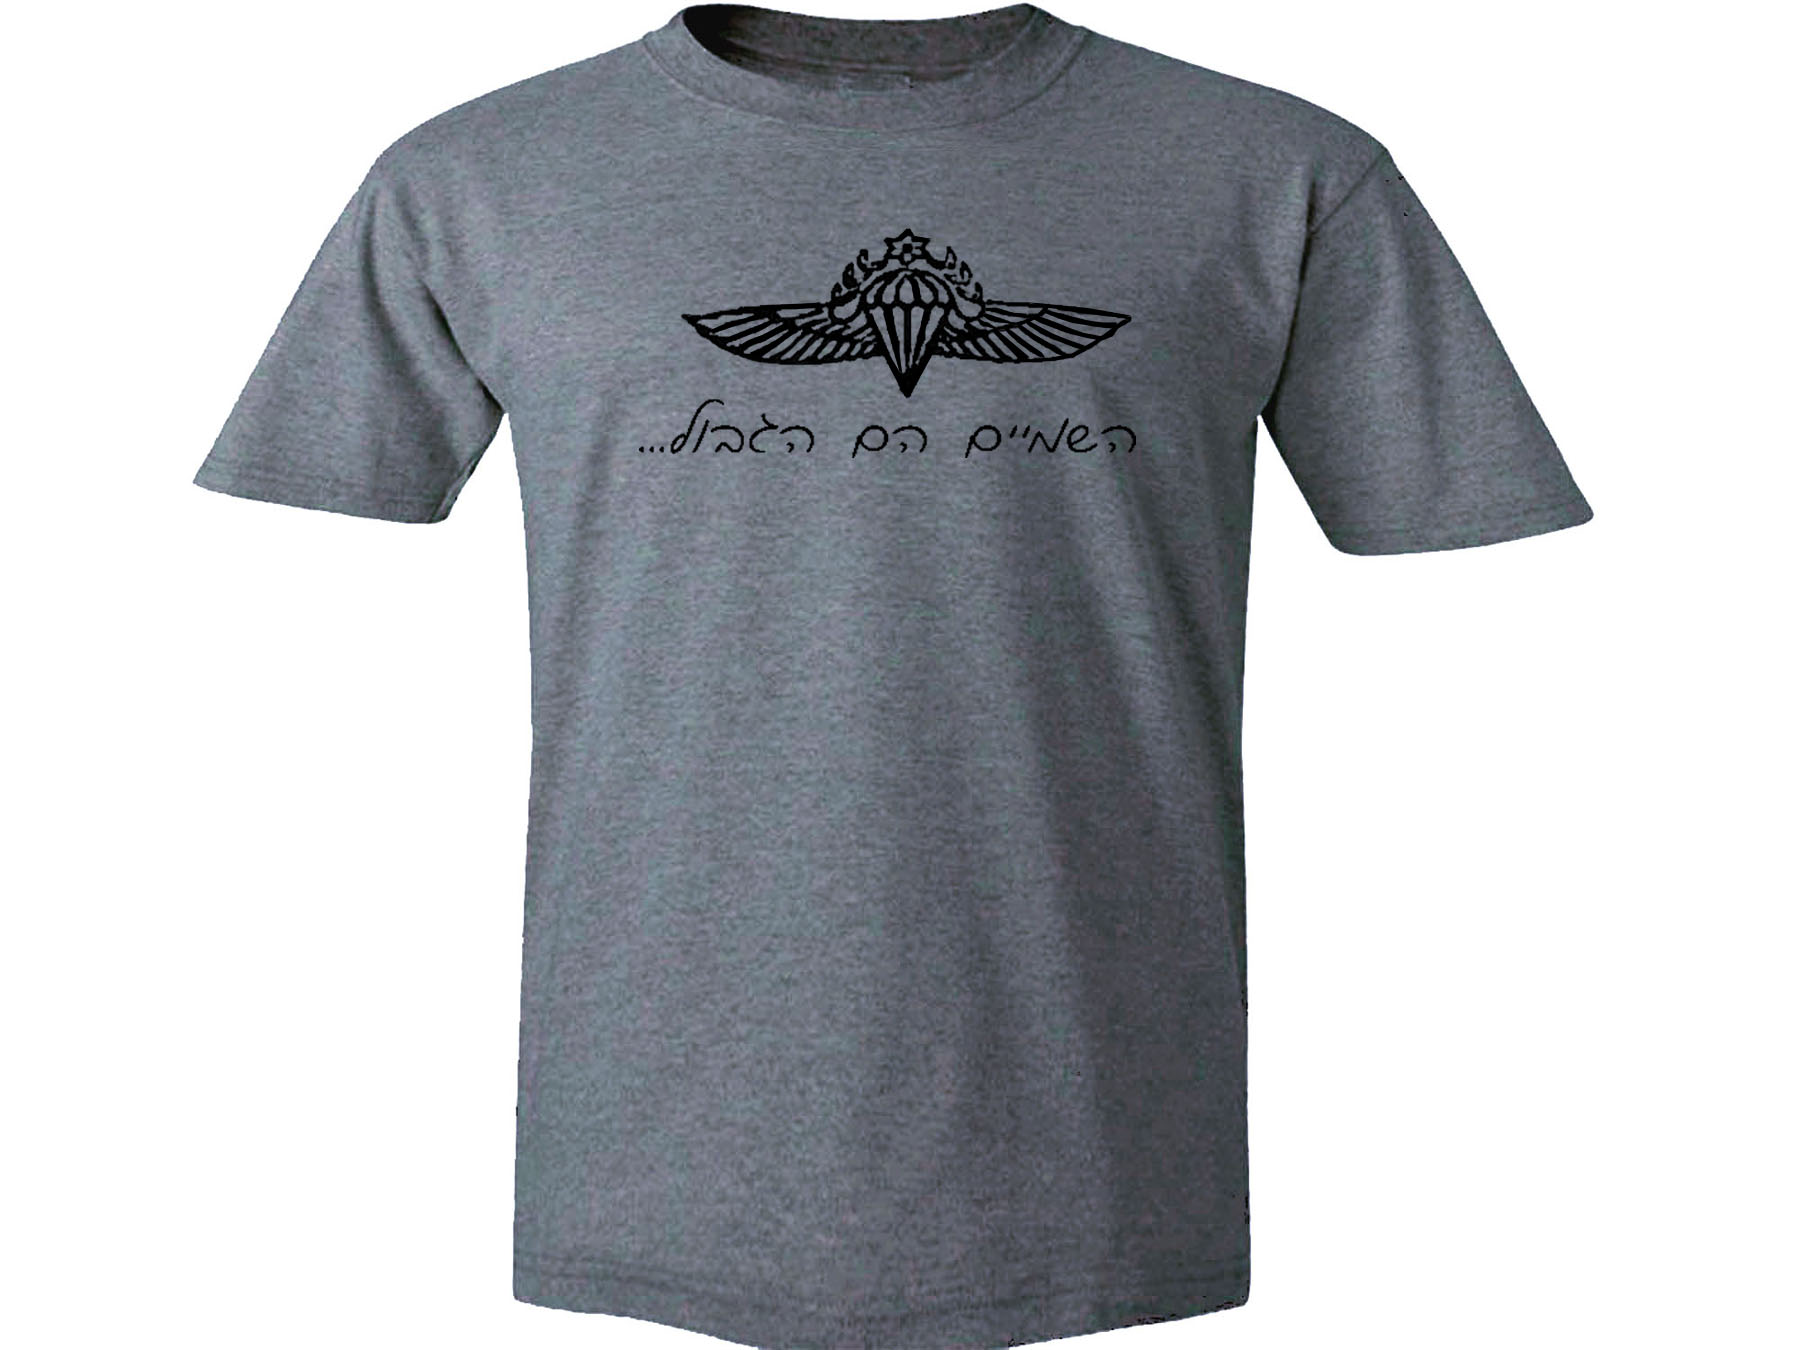 Israel Army Paratroopers Wings IDF zahal gray t-shirt